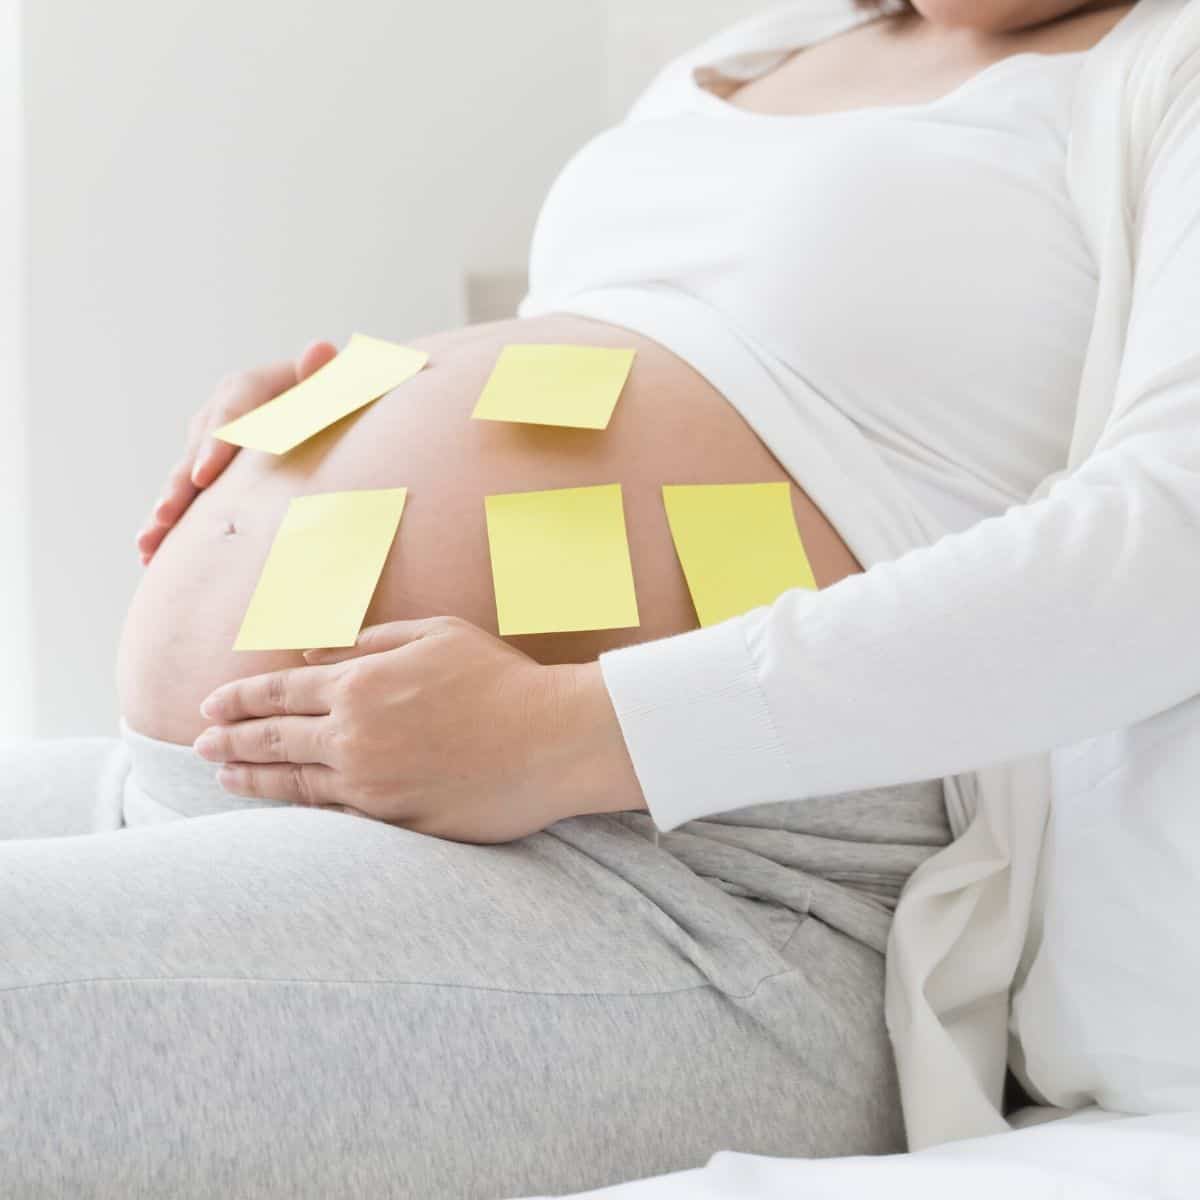 pregnant woman has sticky notes attached to her belly, showing that she's trying to decide on a baby name